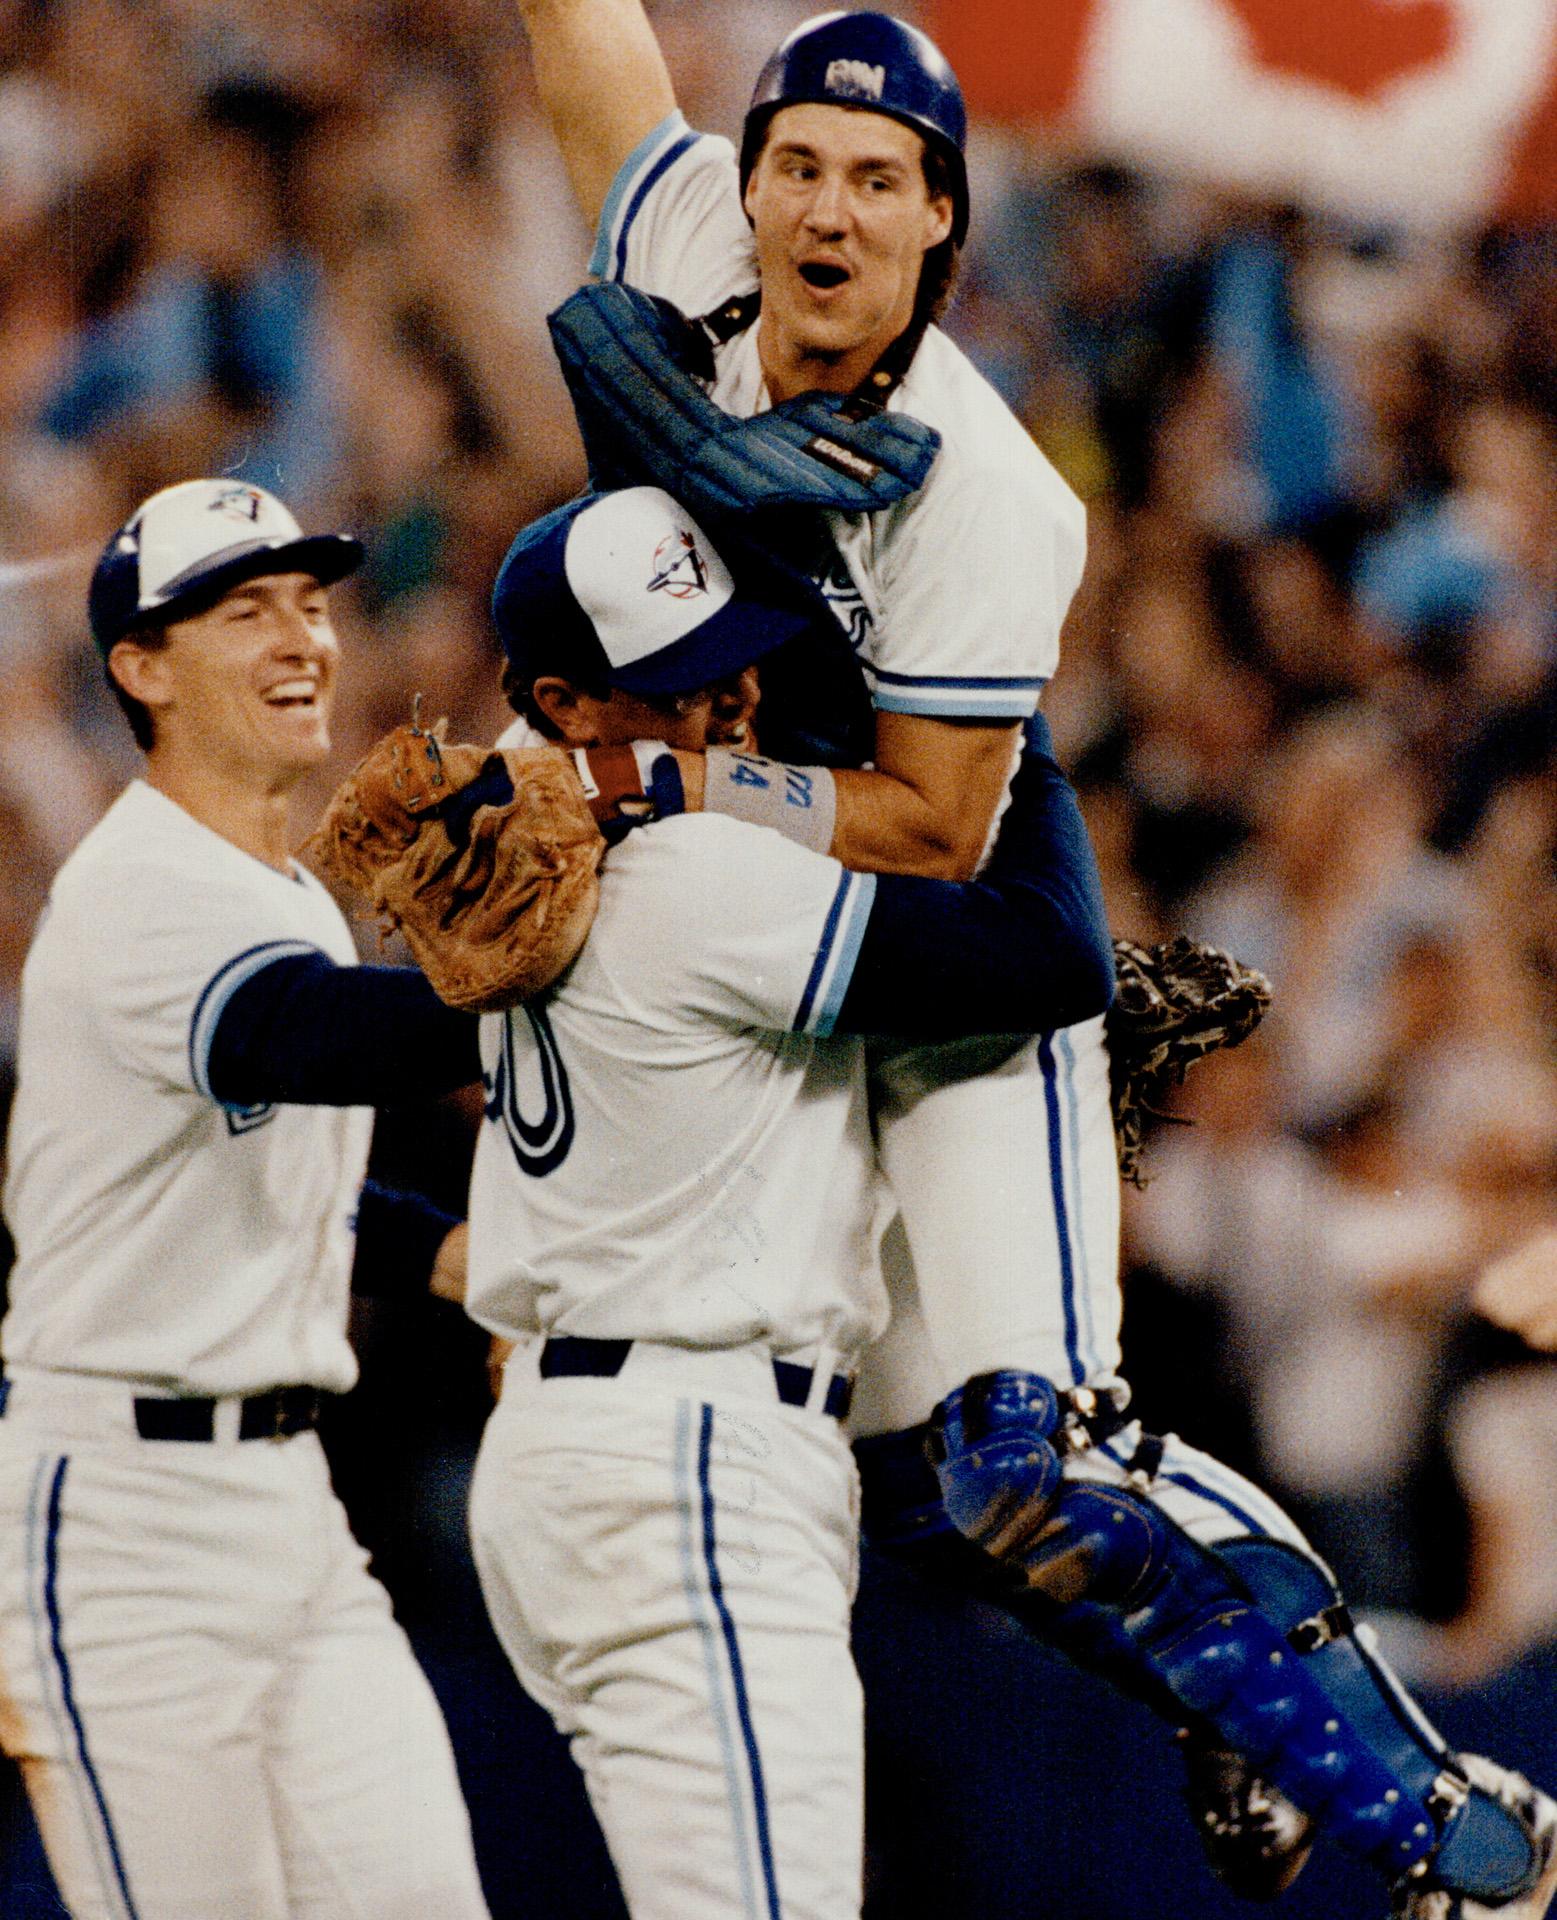 Toronto Blue Jays relief pitcher Tom Henke, right, is congratulated by  catcher Pat Borders after pitching a scoreless ninth inning to preserve the  Blue Jays 2-1 win over the New York Yankees